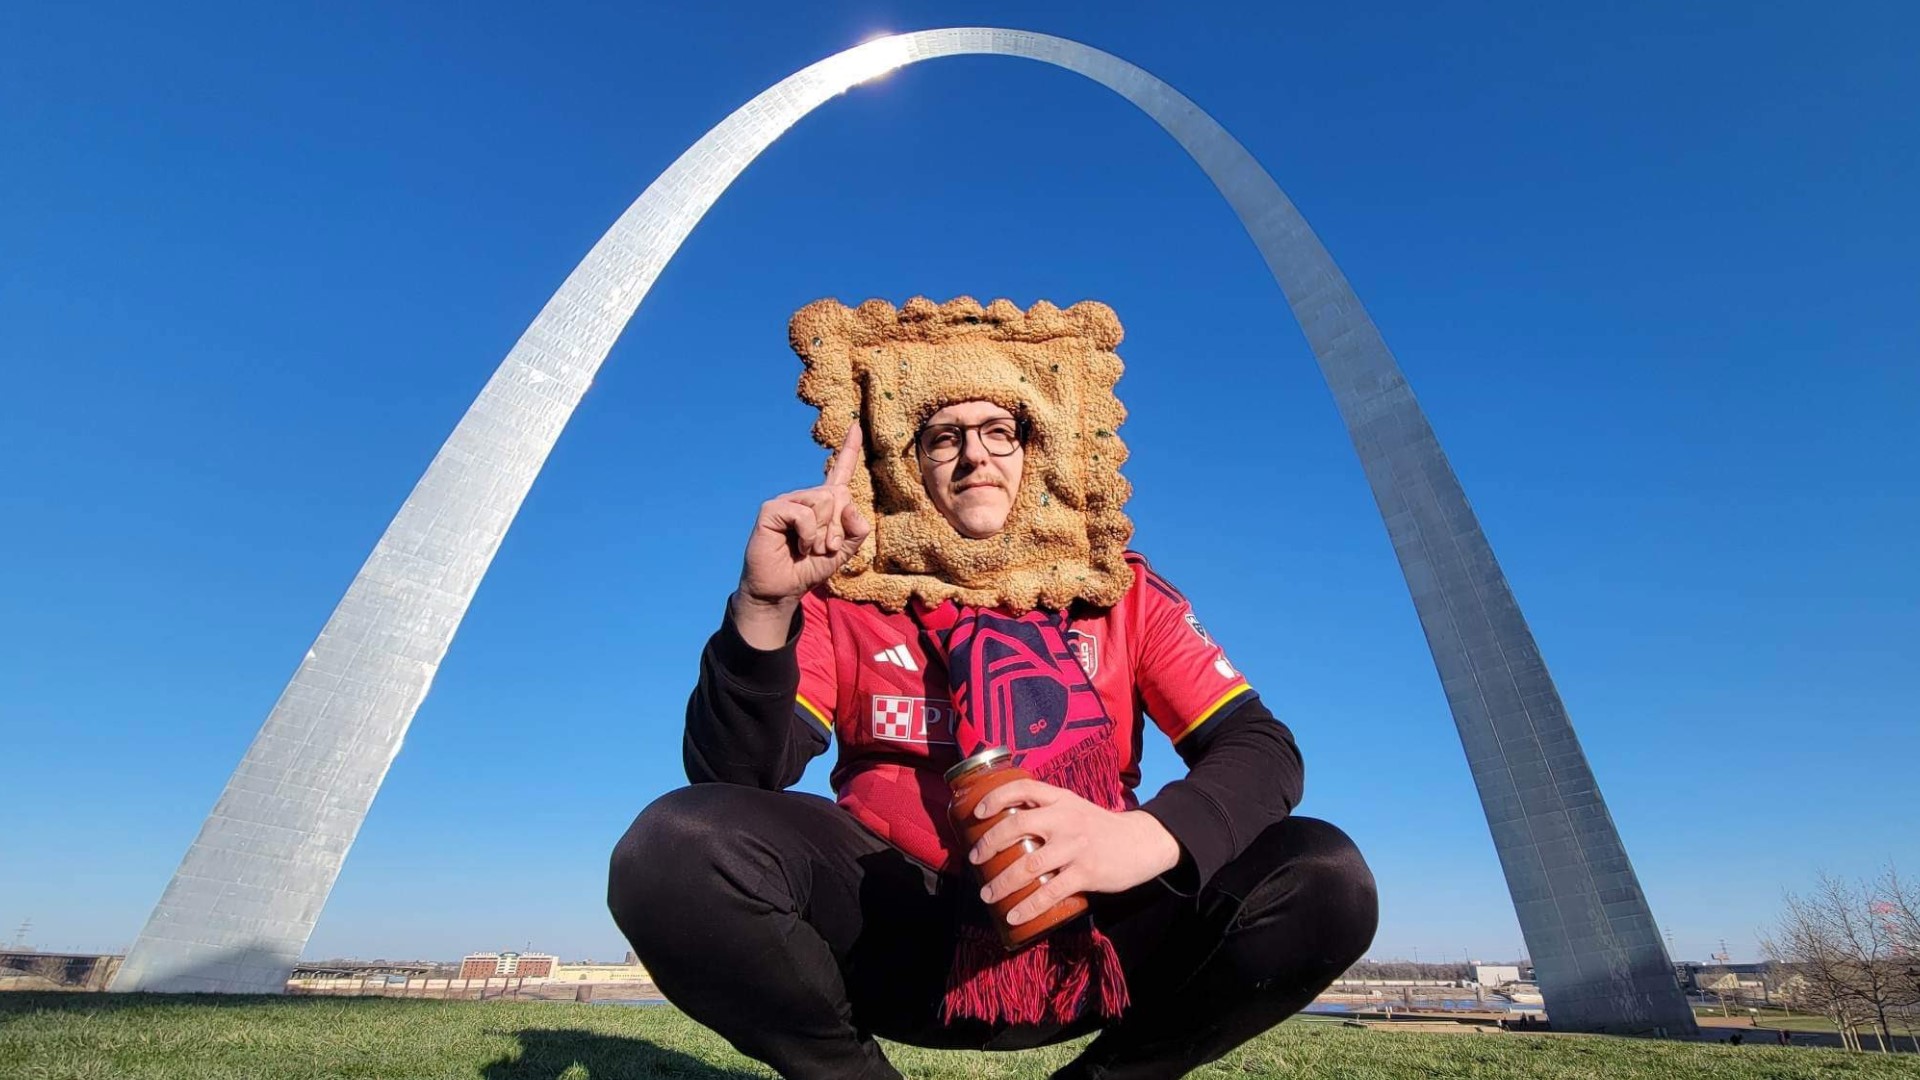 "T-Rav Man" went viral in St. Louis for wearing his toasted ravioli headpiece at a St. Louis CITY SC game. Now, he's reigniting STL pride in the community.